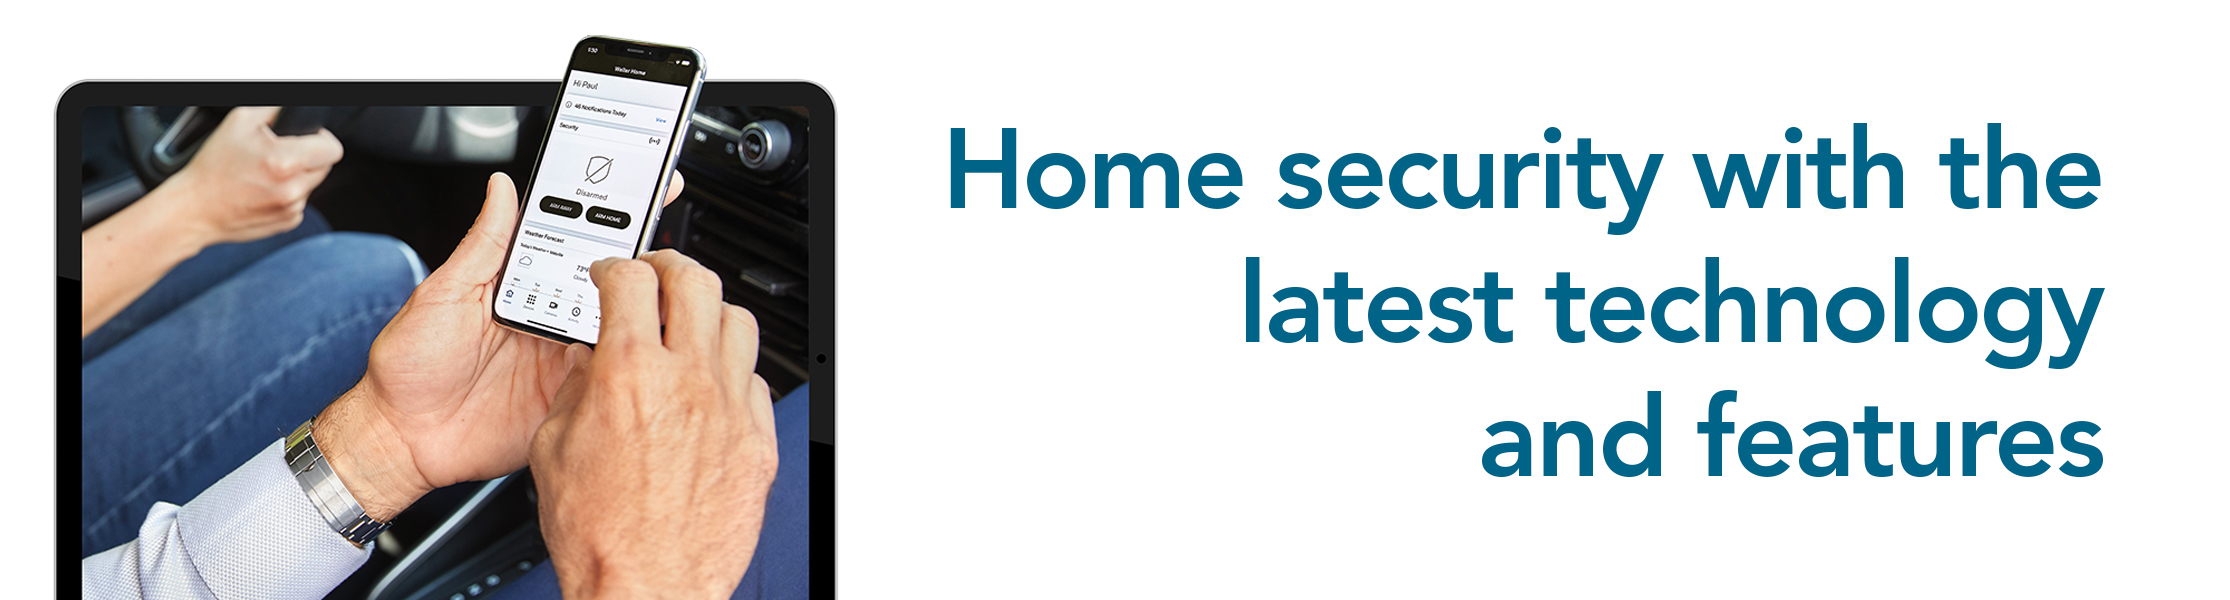 Home Security with the latest technology and features